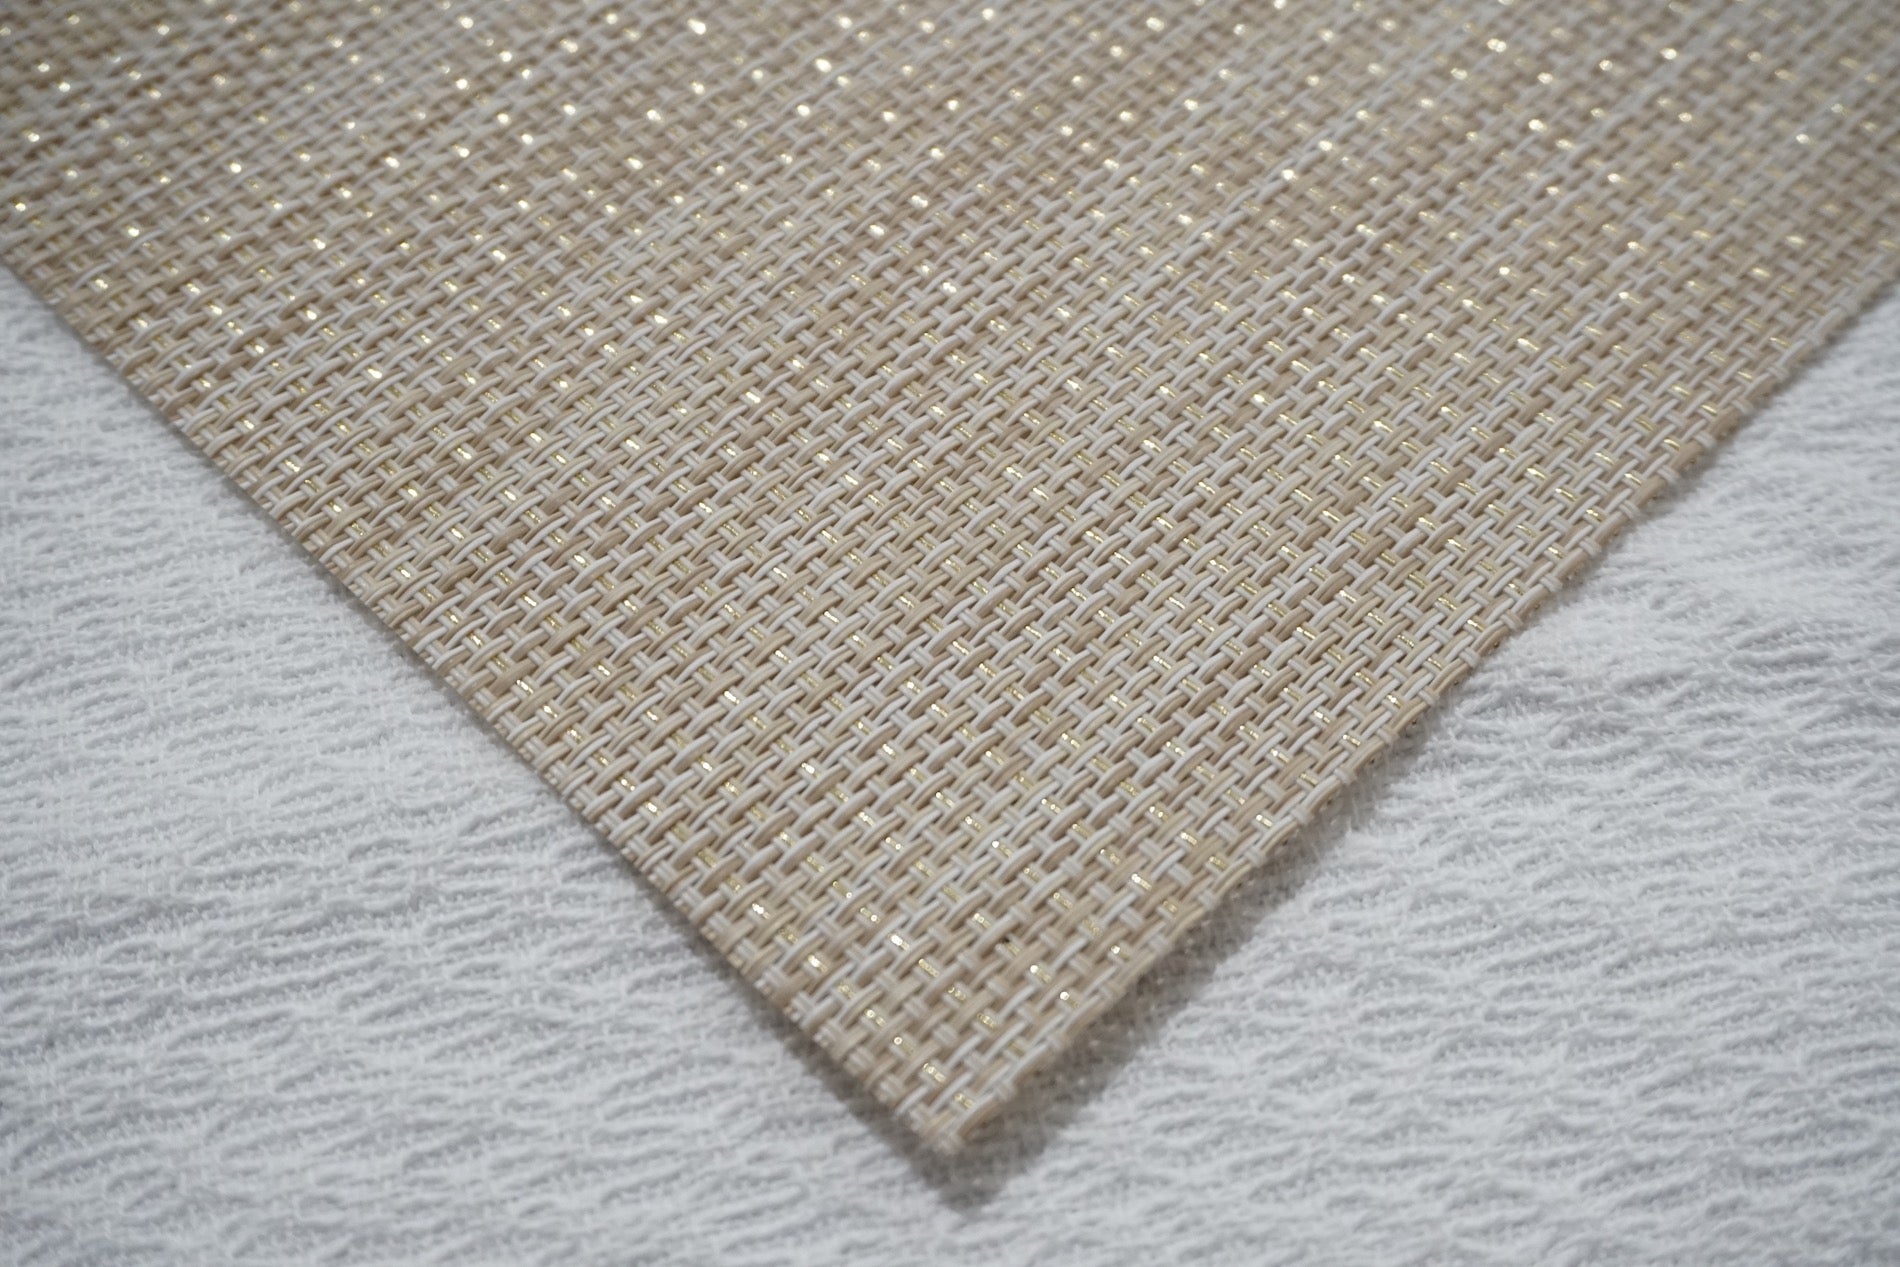 Dainty Home Natural Shimmer Woven Lurex Textilene Crossweave With Embedded Lurex Reversible 15" x 15" Square Placemats